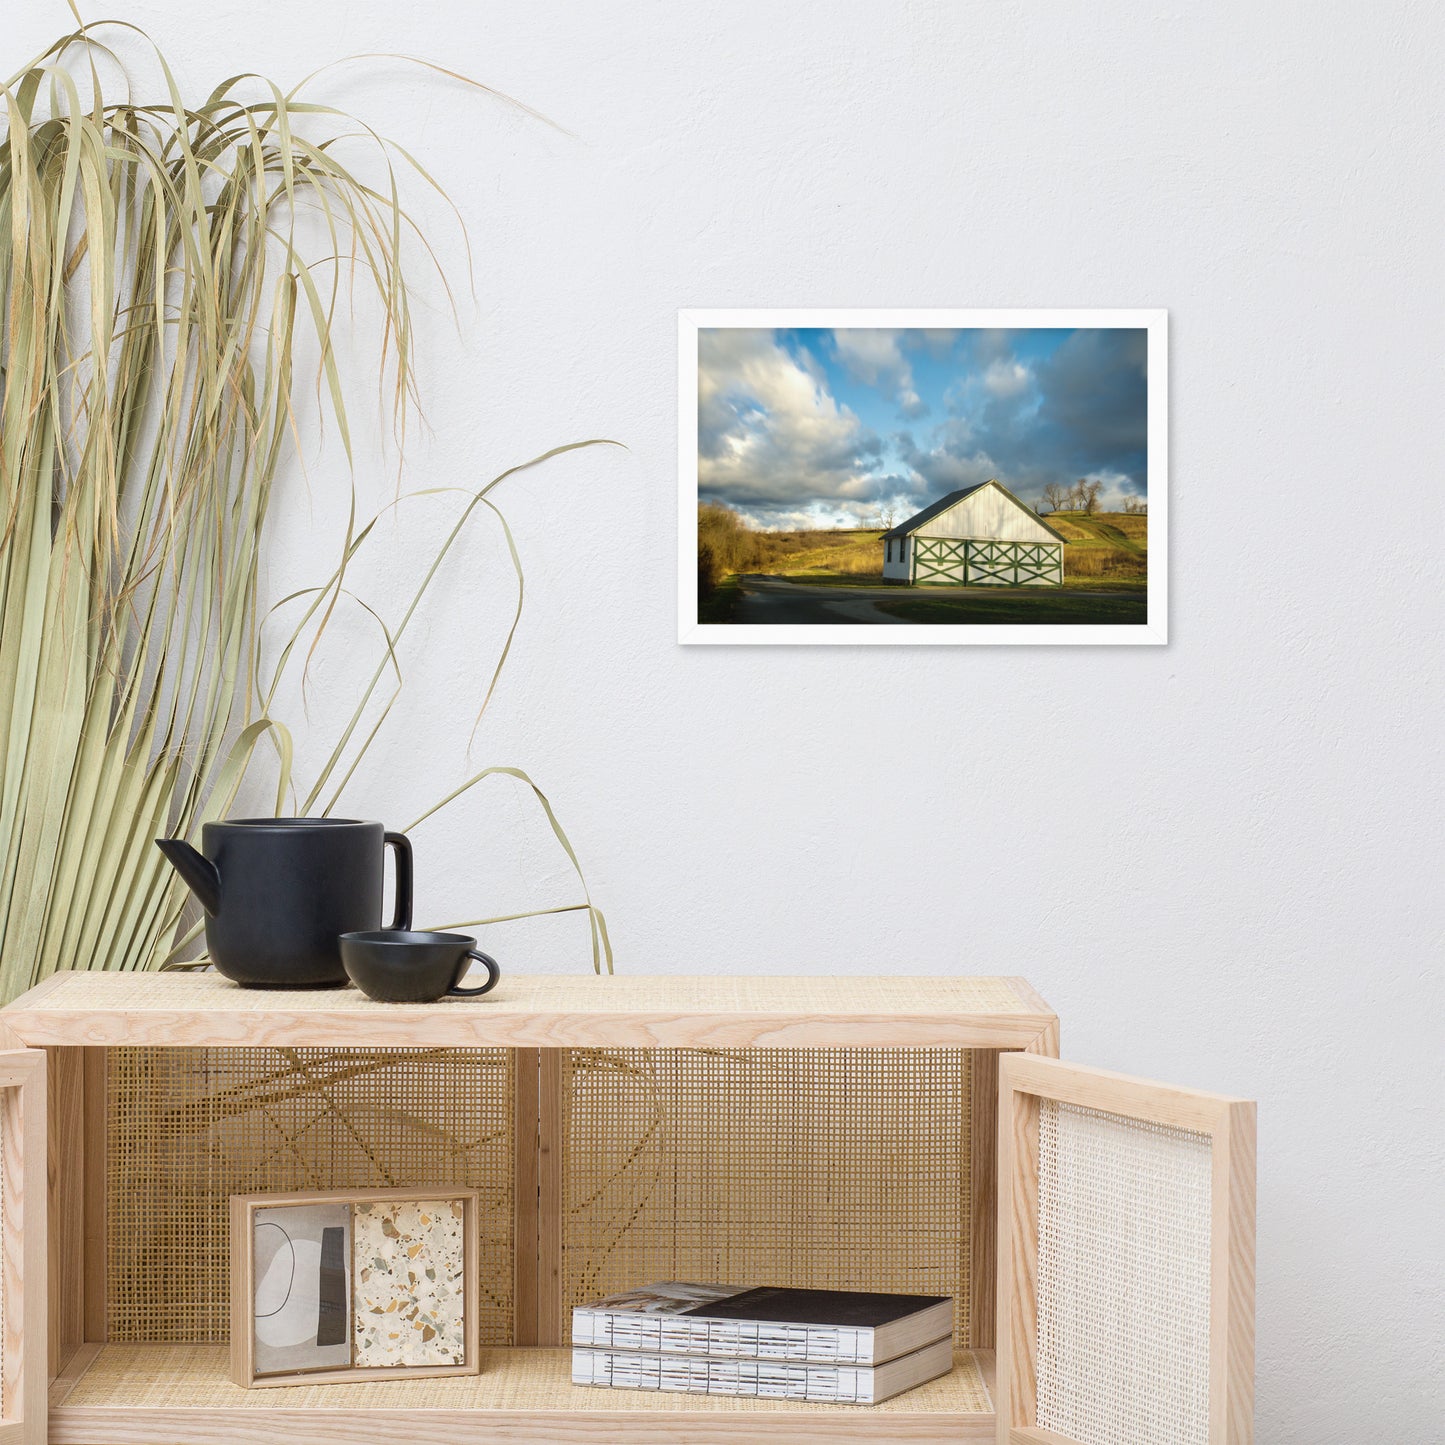 Simple Art For Bedroom: Aging Barn in the Morning Sun - Rural / Country Style Landscape / Nature Photograph  Framed Wall Art Print - Wall Decor - Artwork